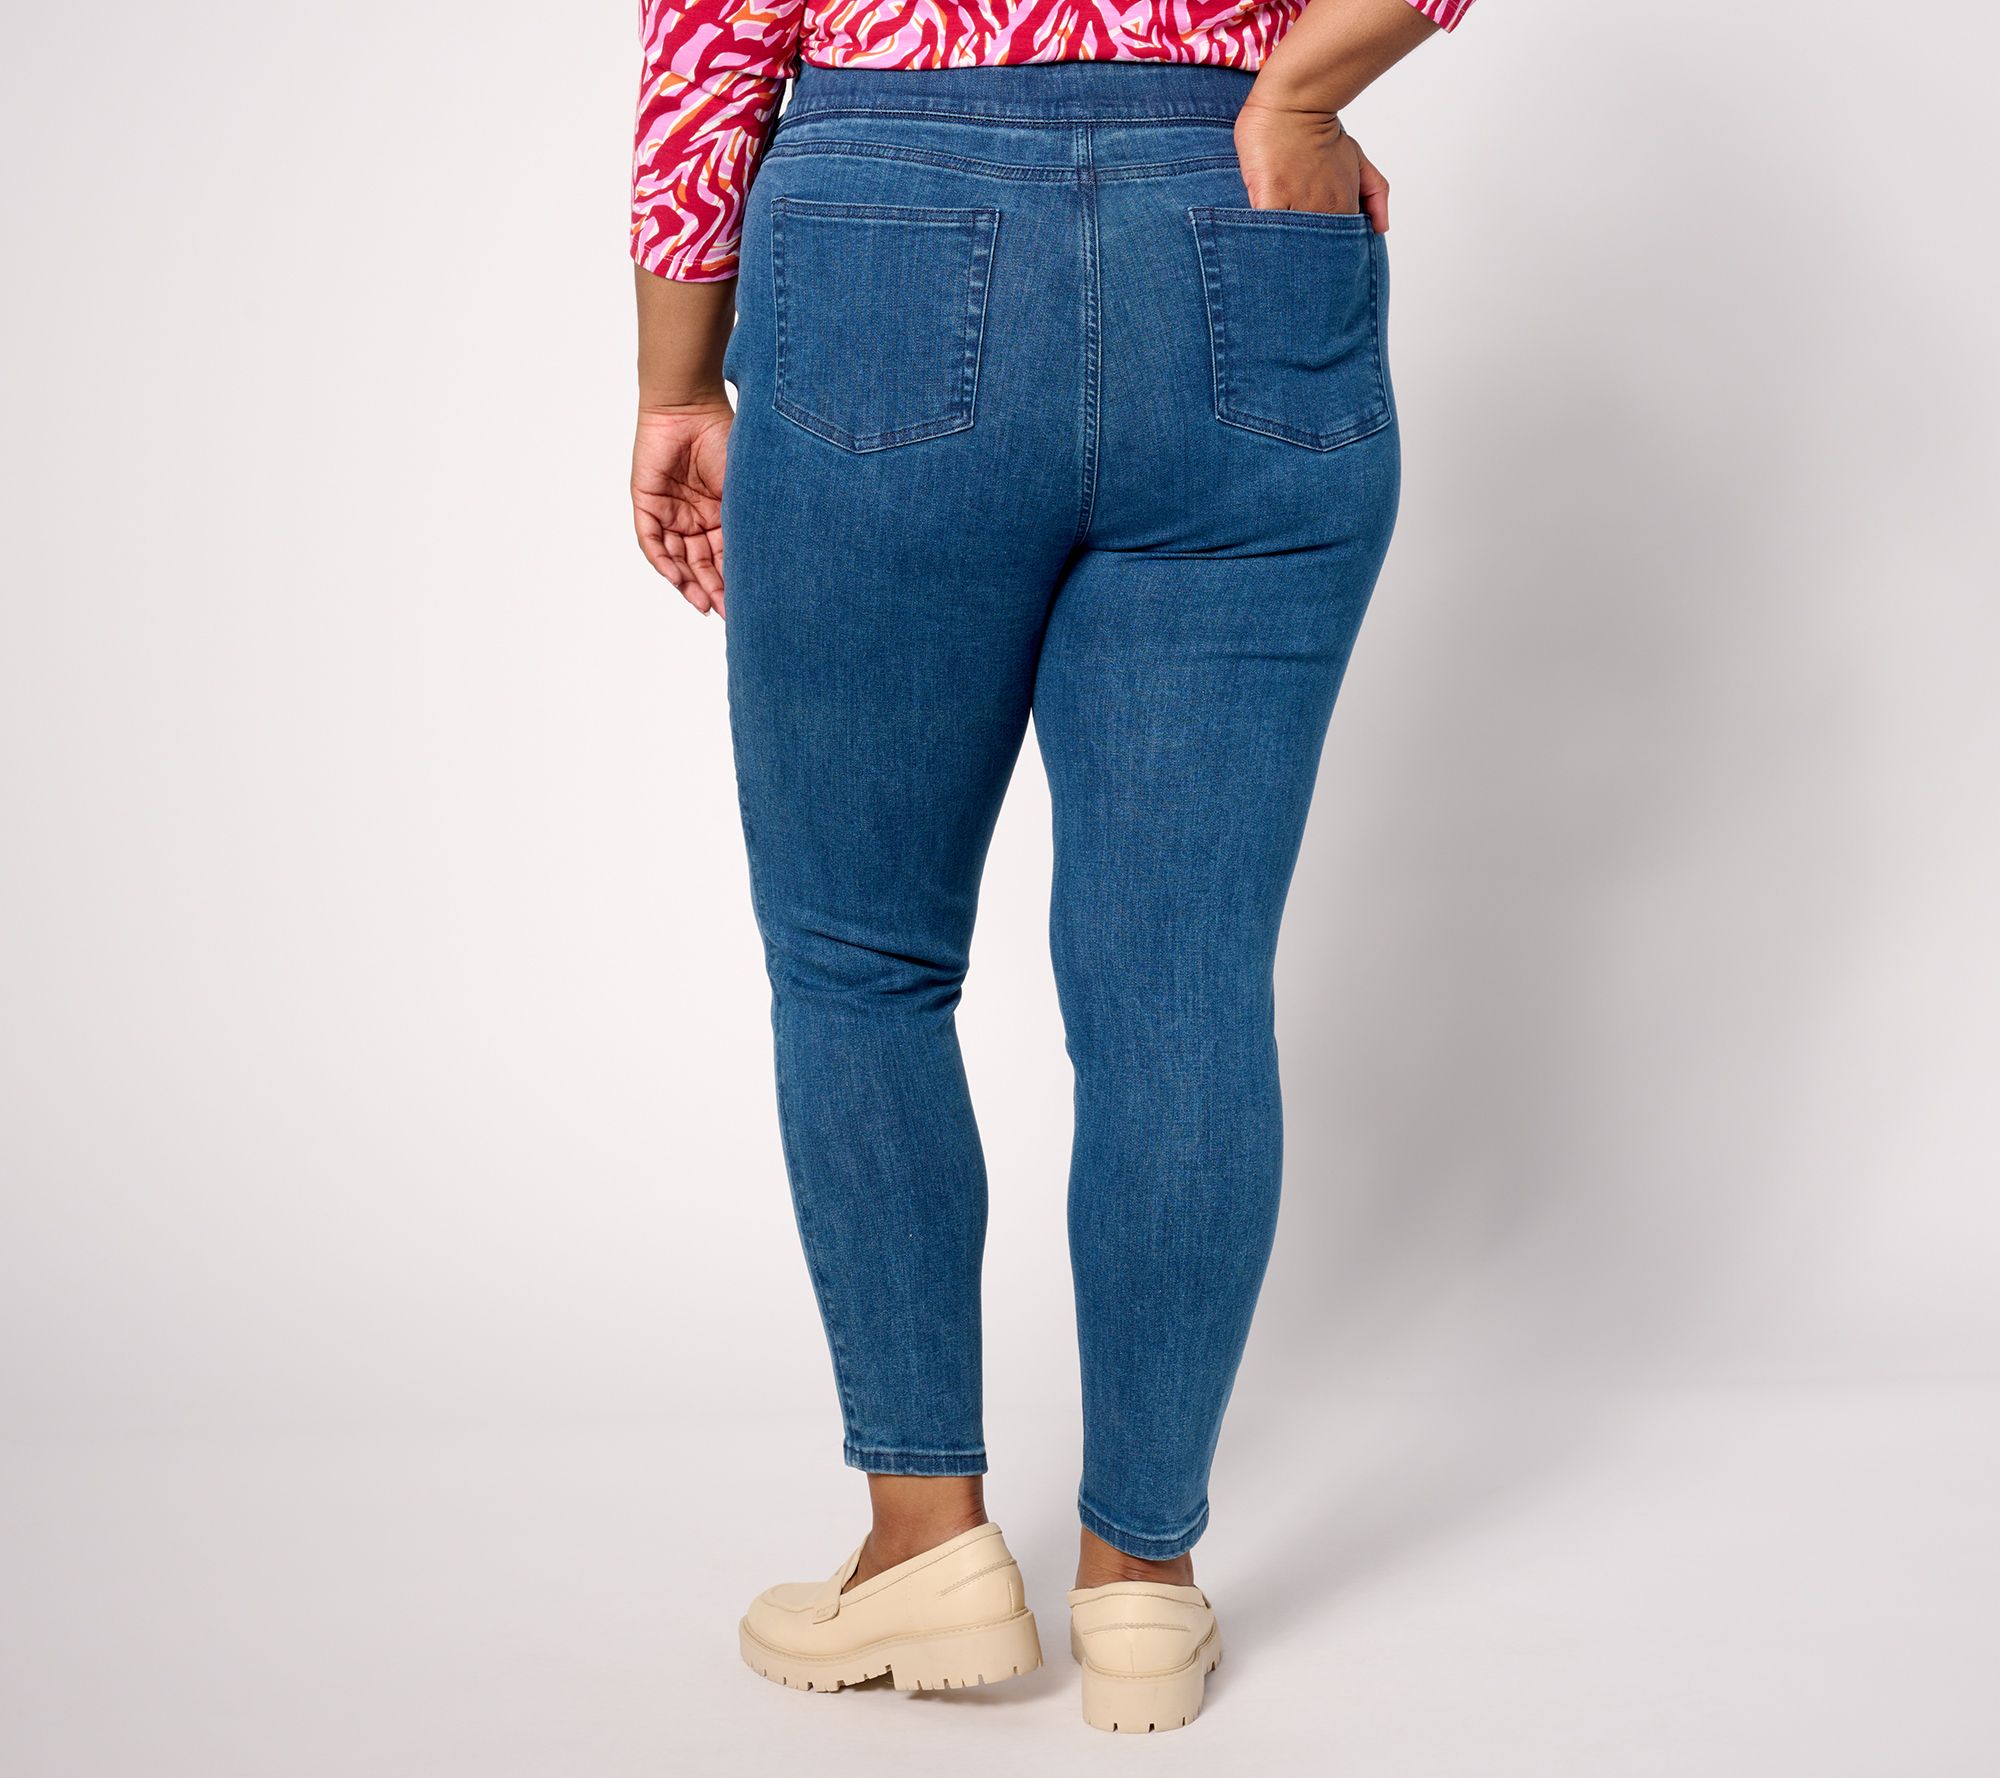 Denim & Co. Easy Stretch Jegging with Seam Details 